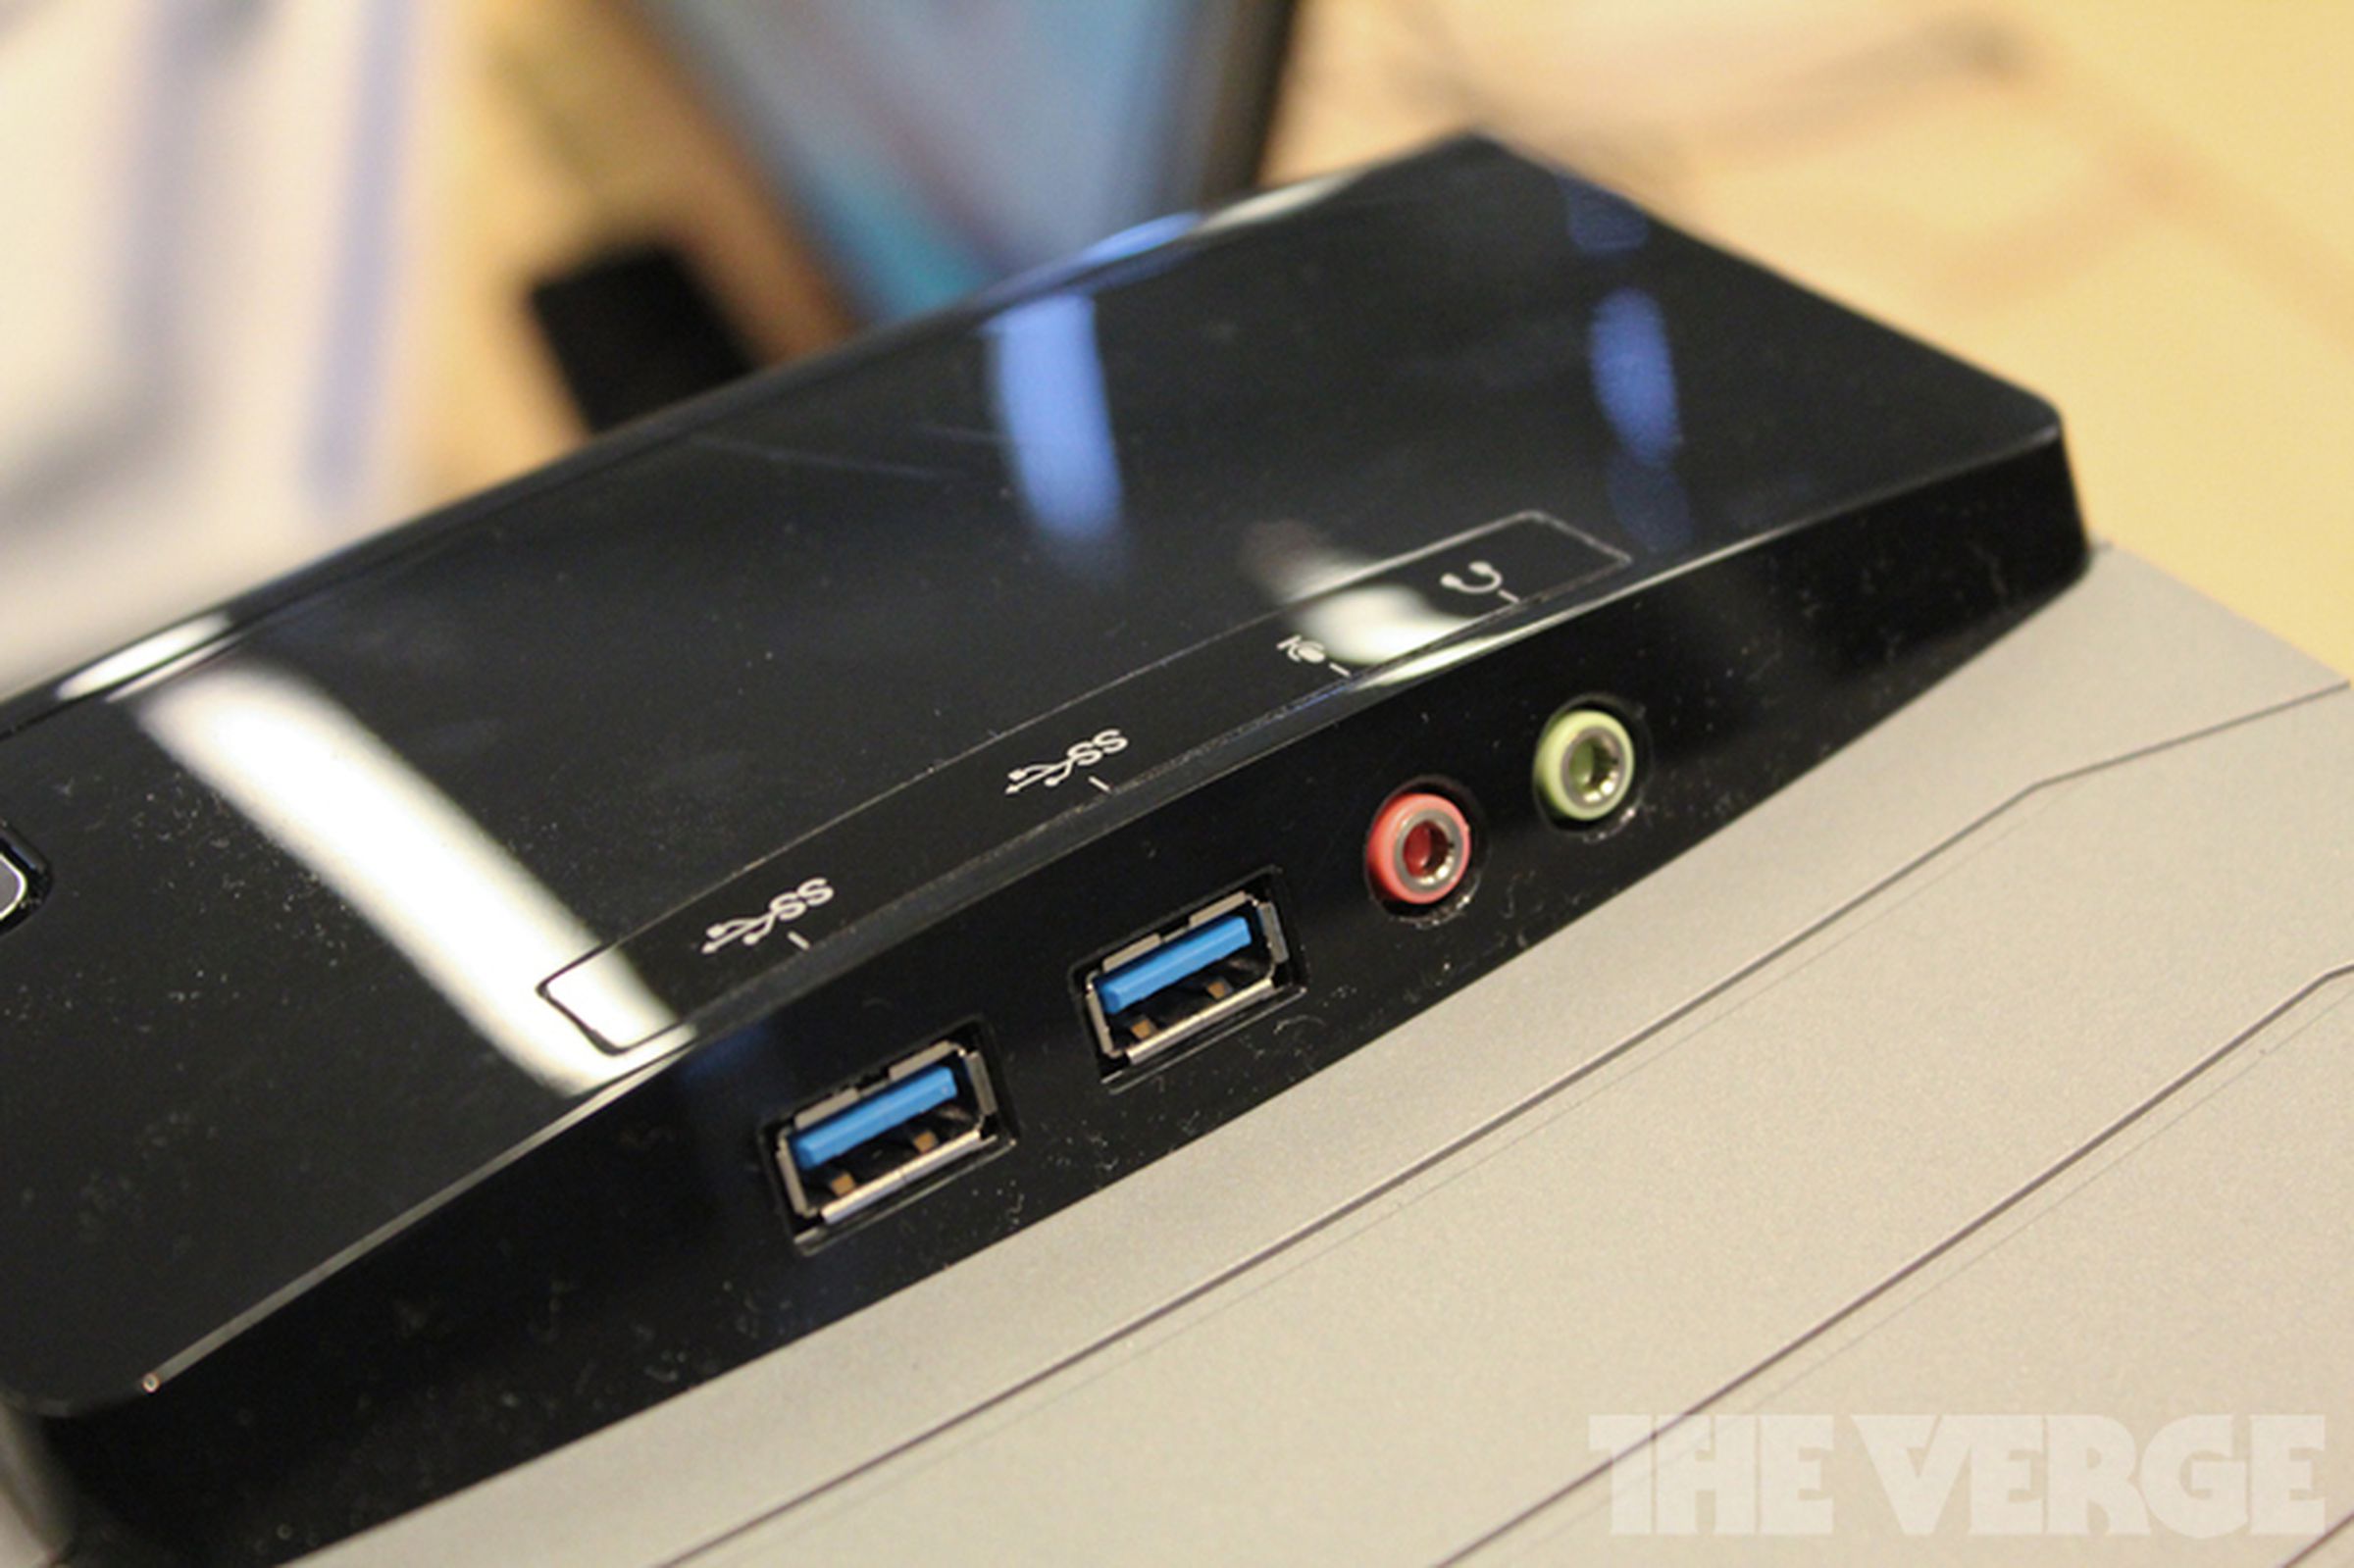 HP Pavilion HPE h9 Phoenix hands-on and press photos